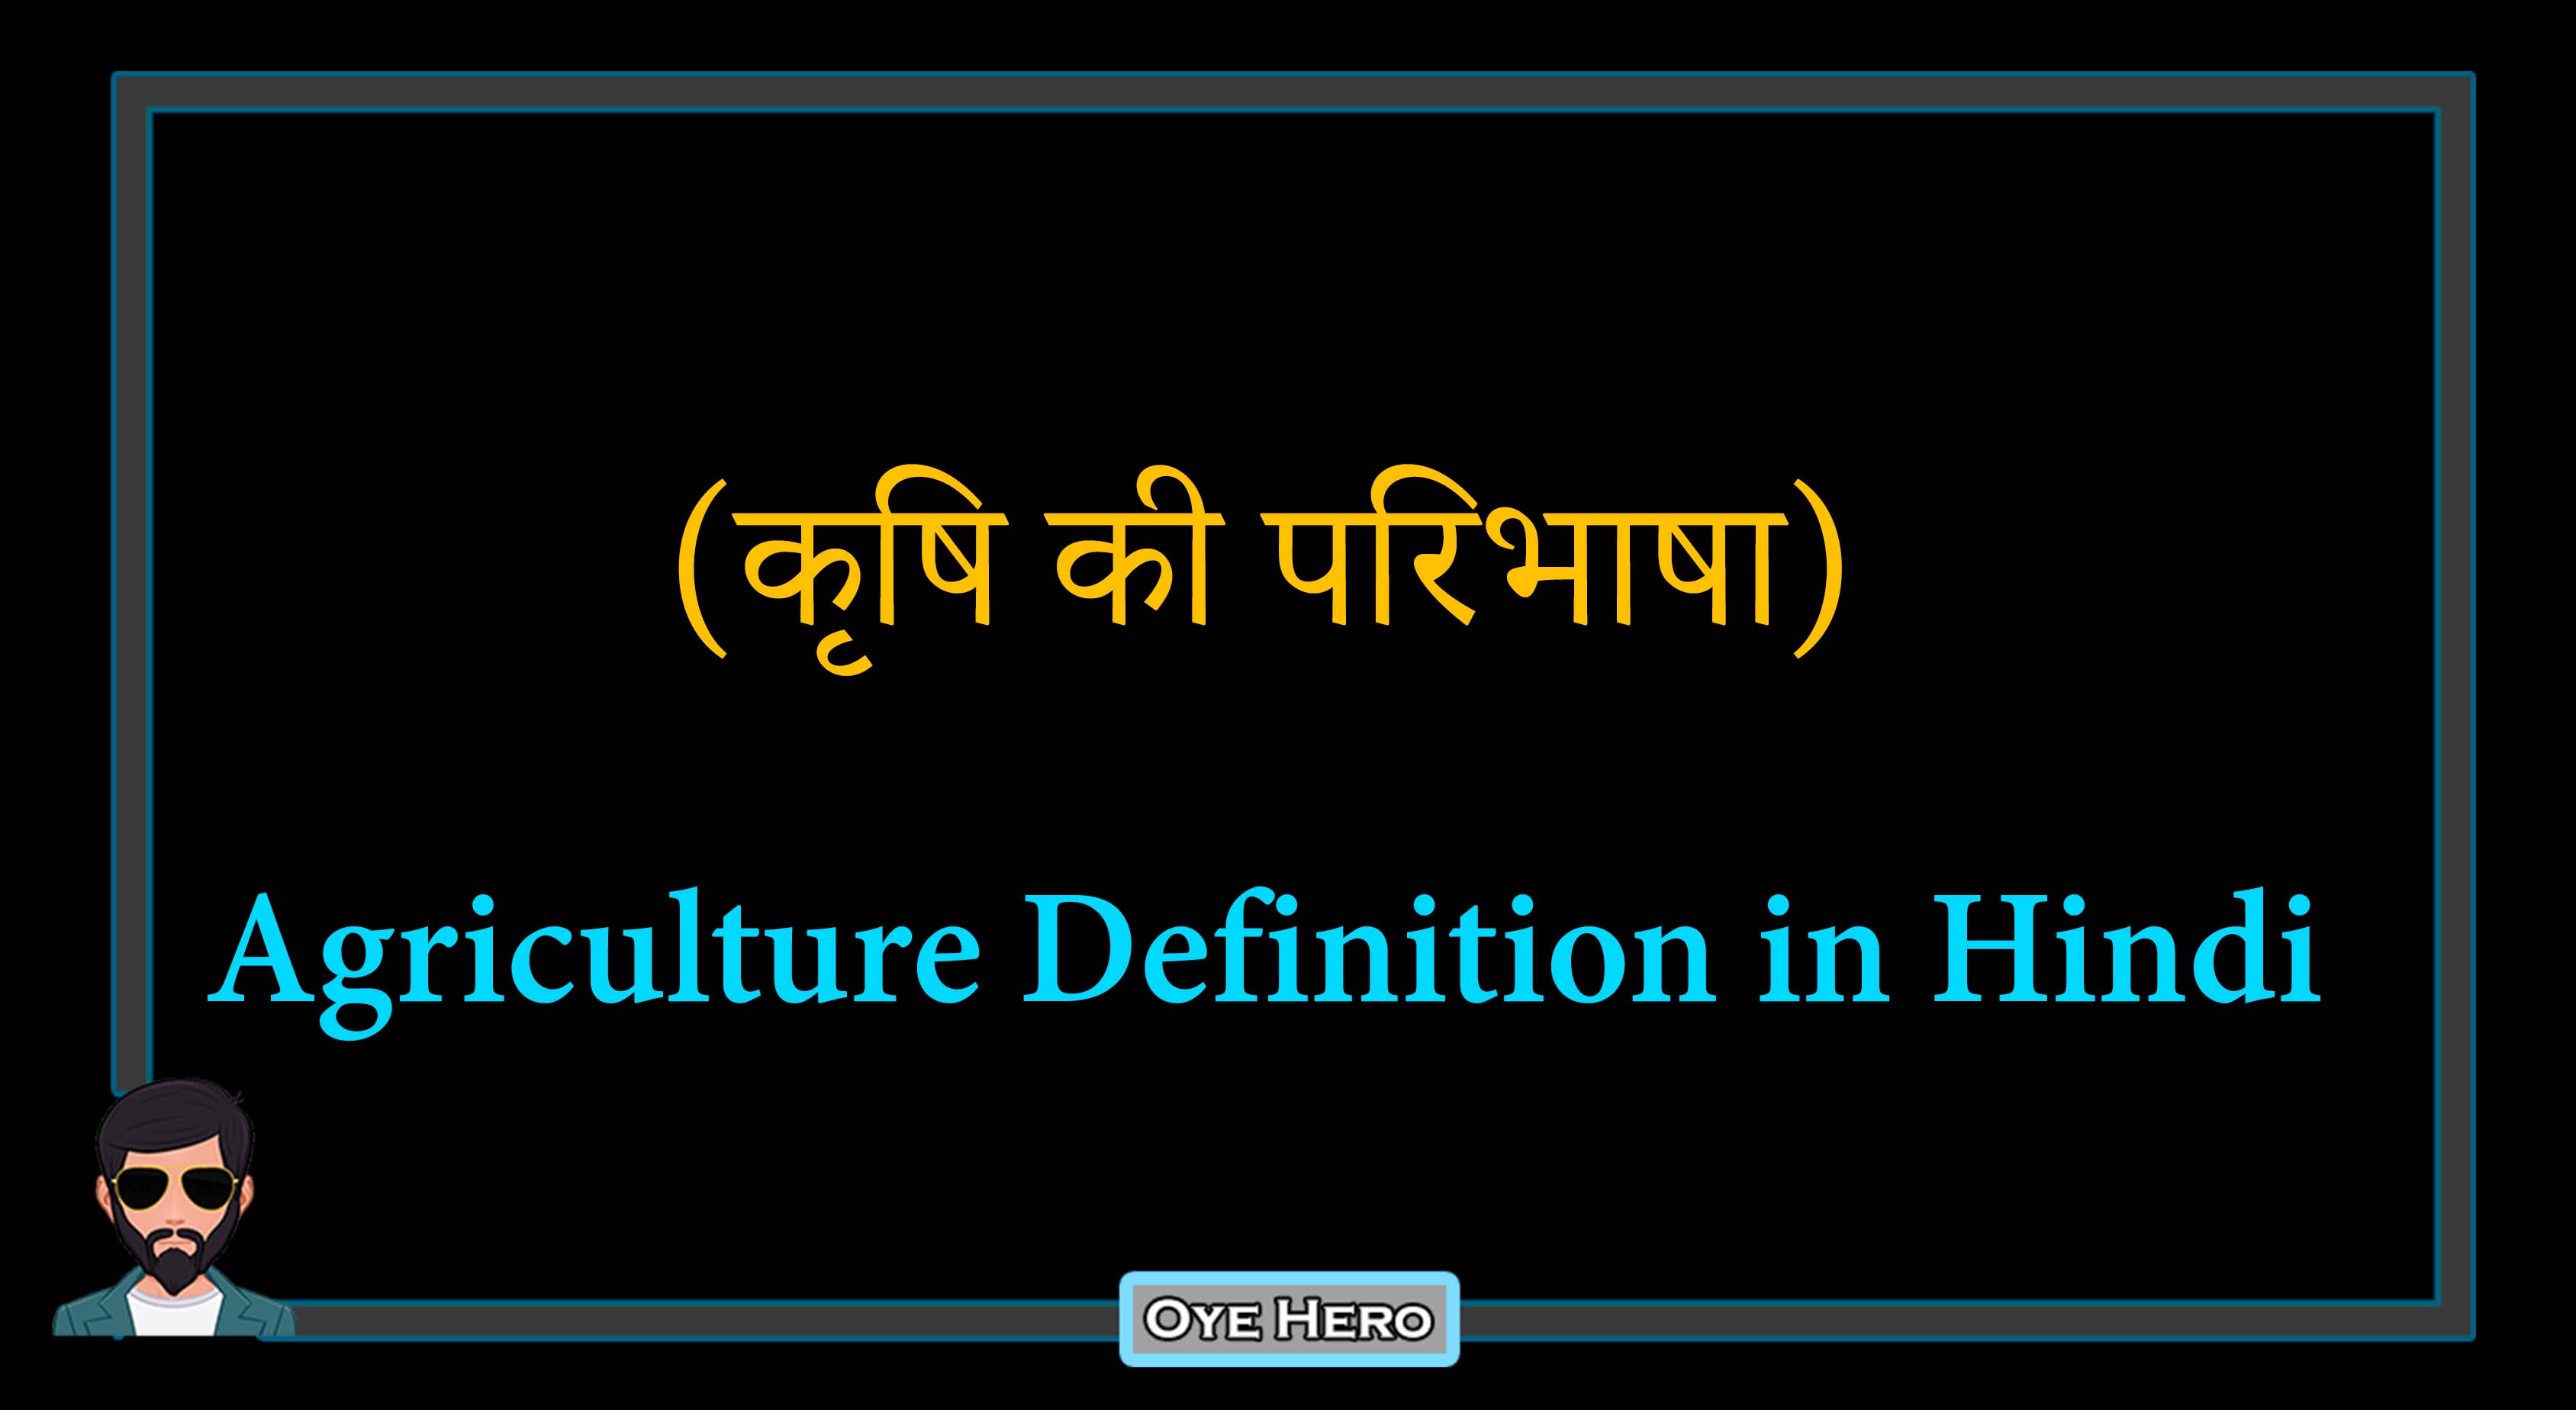 You are currently viewing (कृषि की परिभाषा) Meaning & Definition of Agriculture in Hindi !!